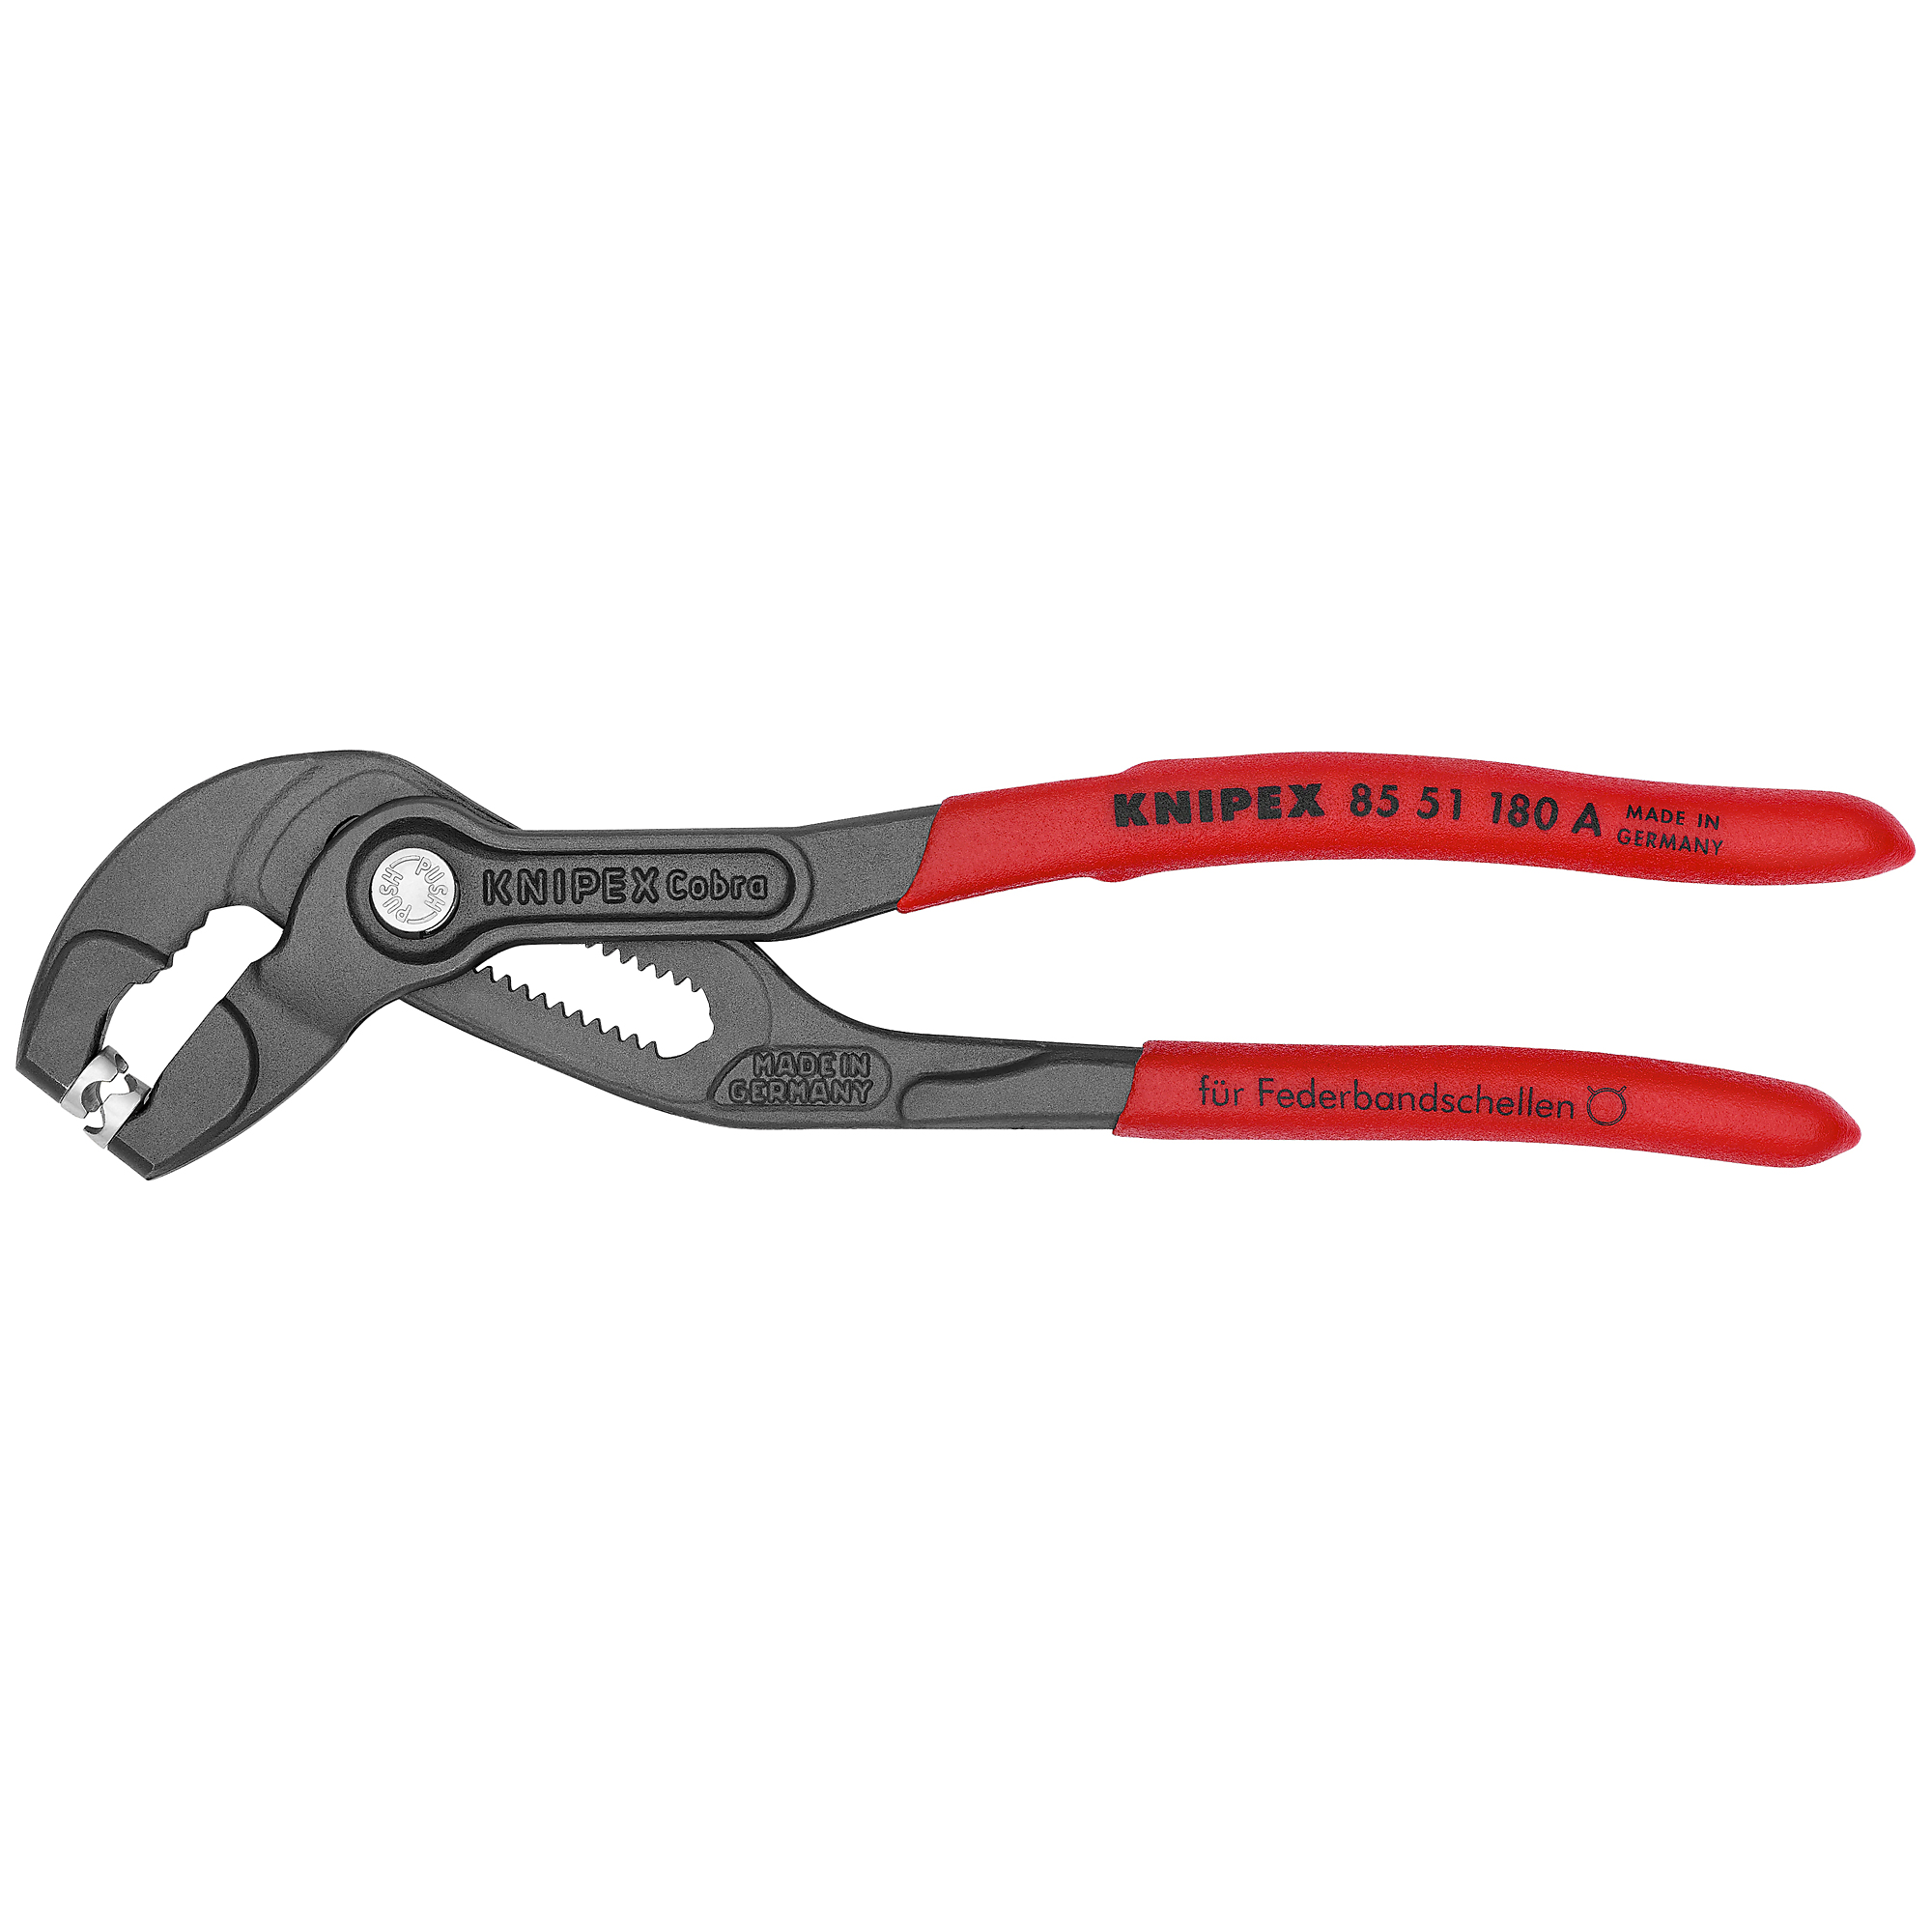 KNIPEX, Spring Hose Clamp Pliers, Bulk, 7.25Inch, Pieces (qty.) 1 Material Steel, Jaw Capacity 2 in, Model 85 51 180 A